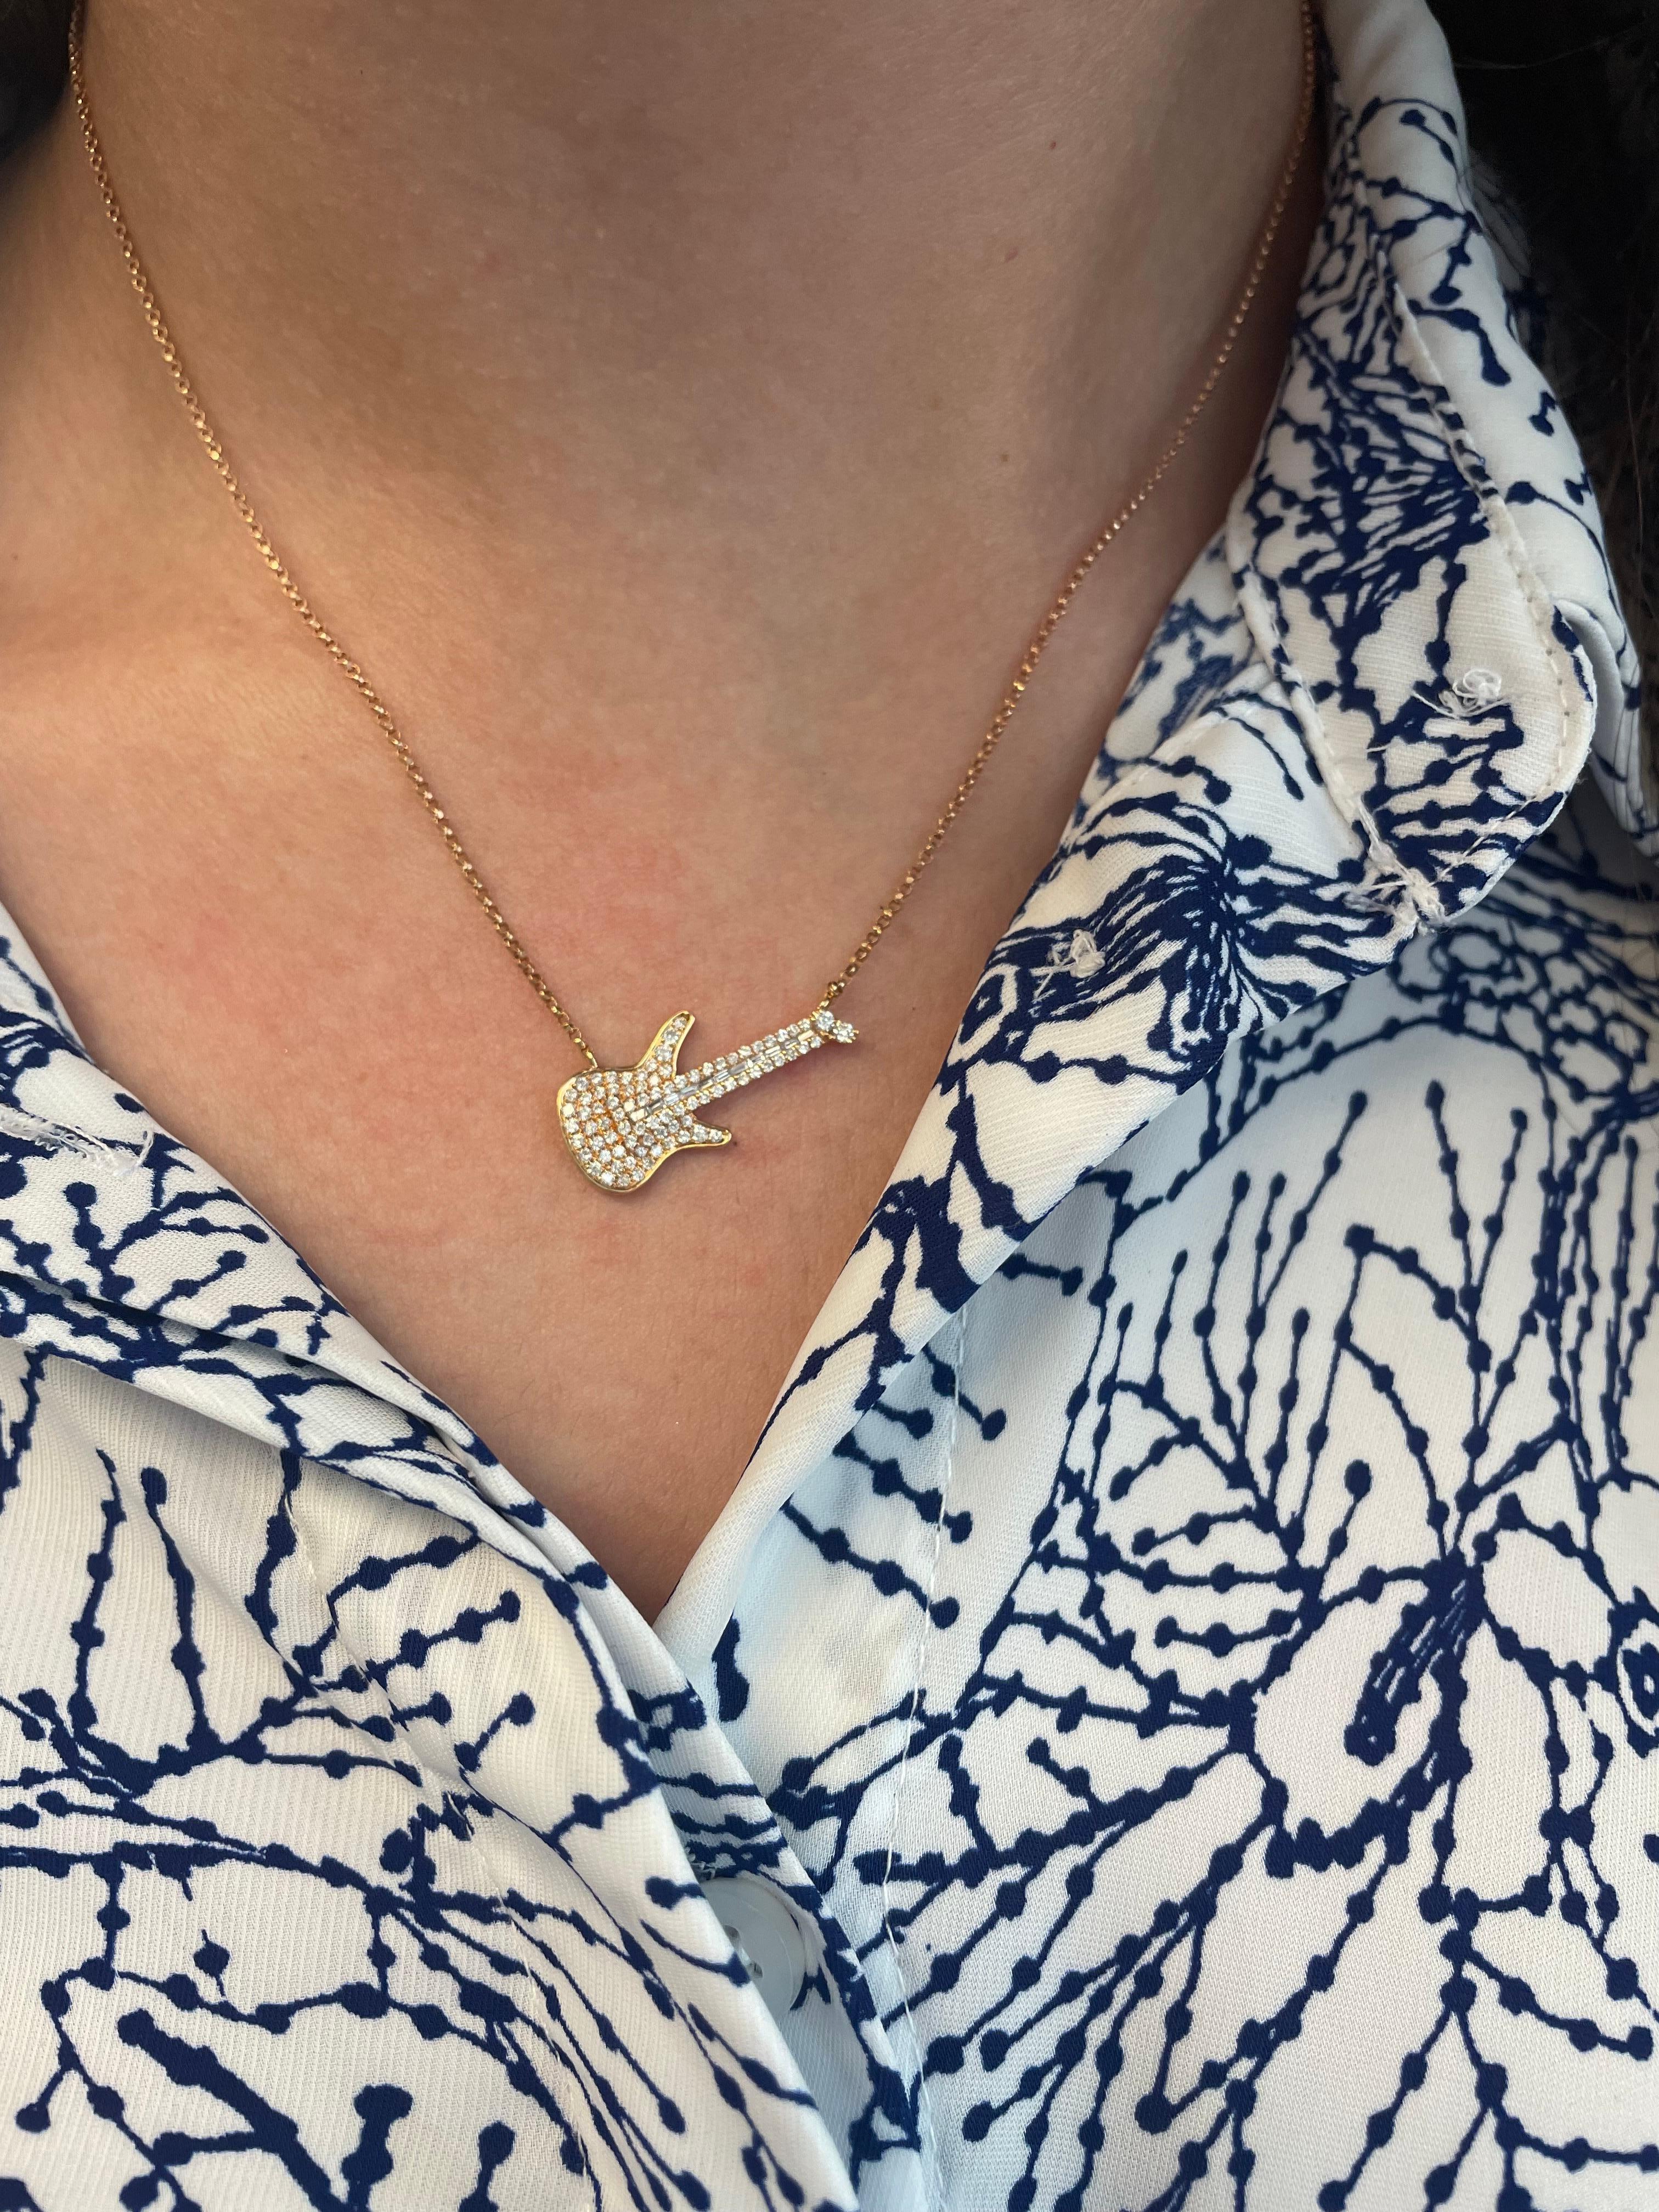 Exquisite and timeless guitar diamond pendant necklace. By Alexander Beverly Hills.
93 round and baguette diamonds, 0.39ct carats total. Approximately GH color and SI clarity. Four prong and invisible set in 18k rose gold.
Accommodated with an